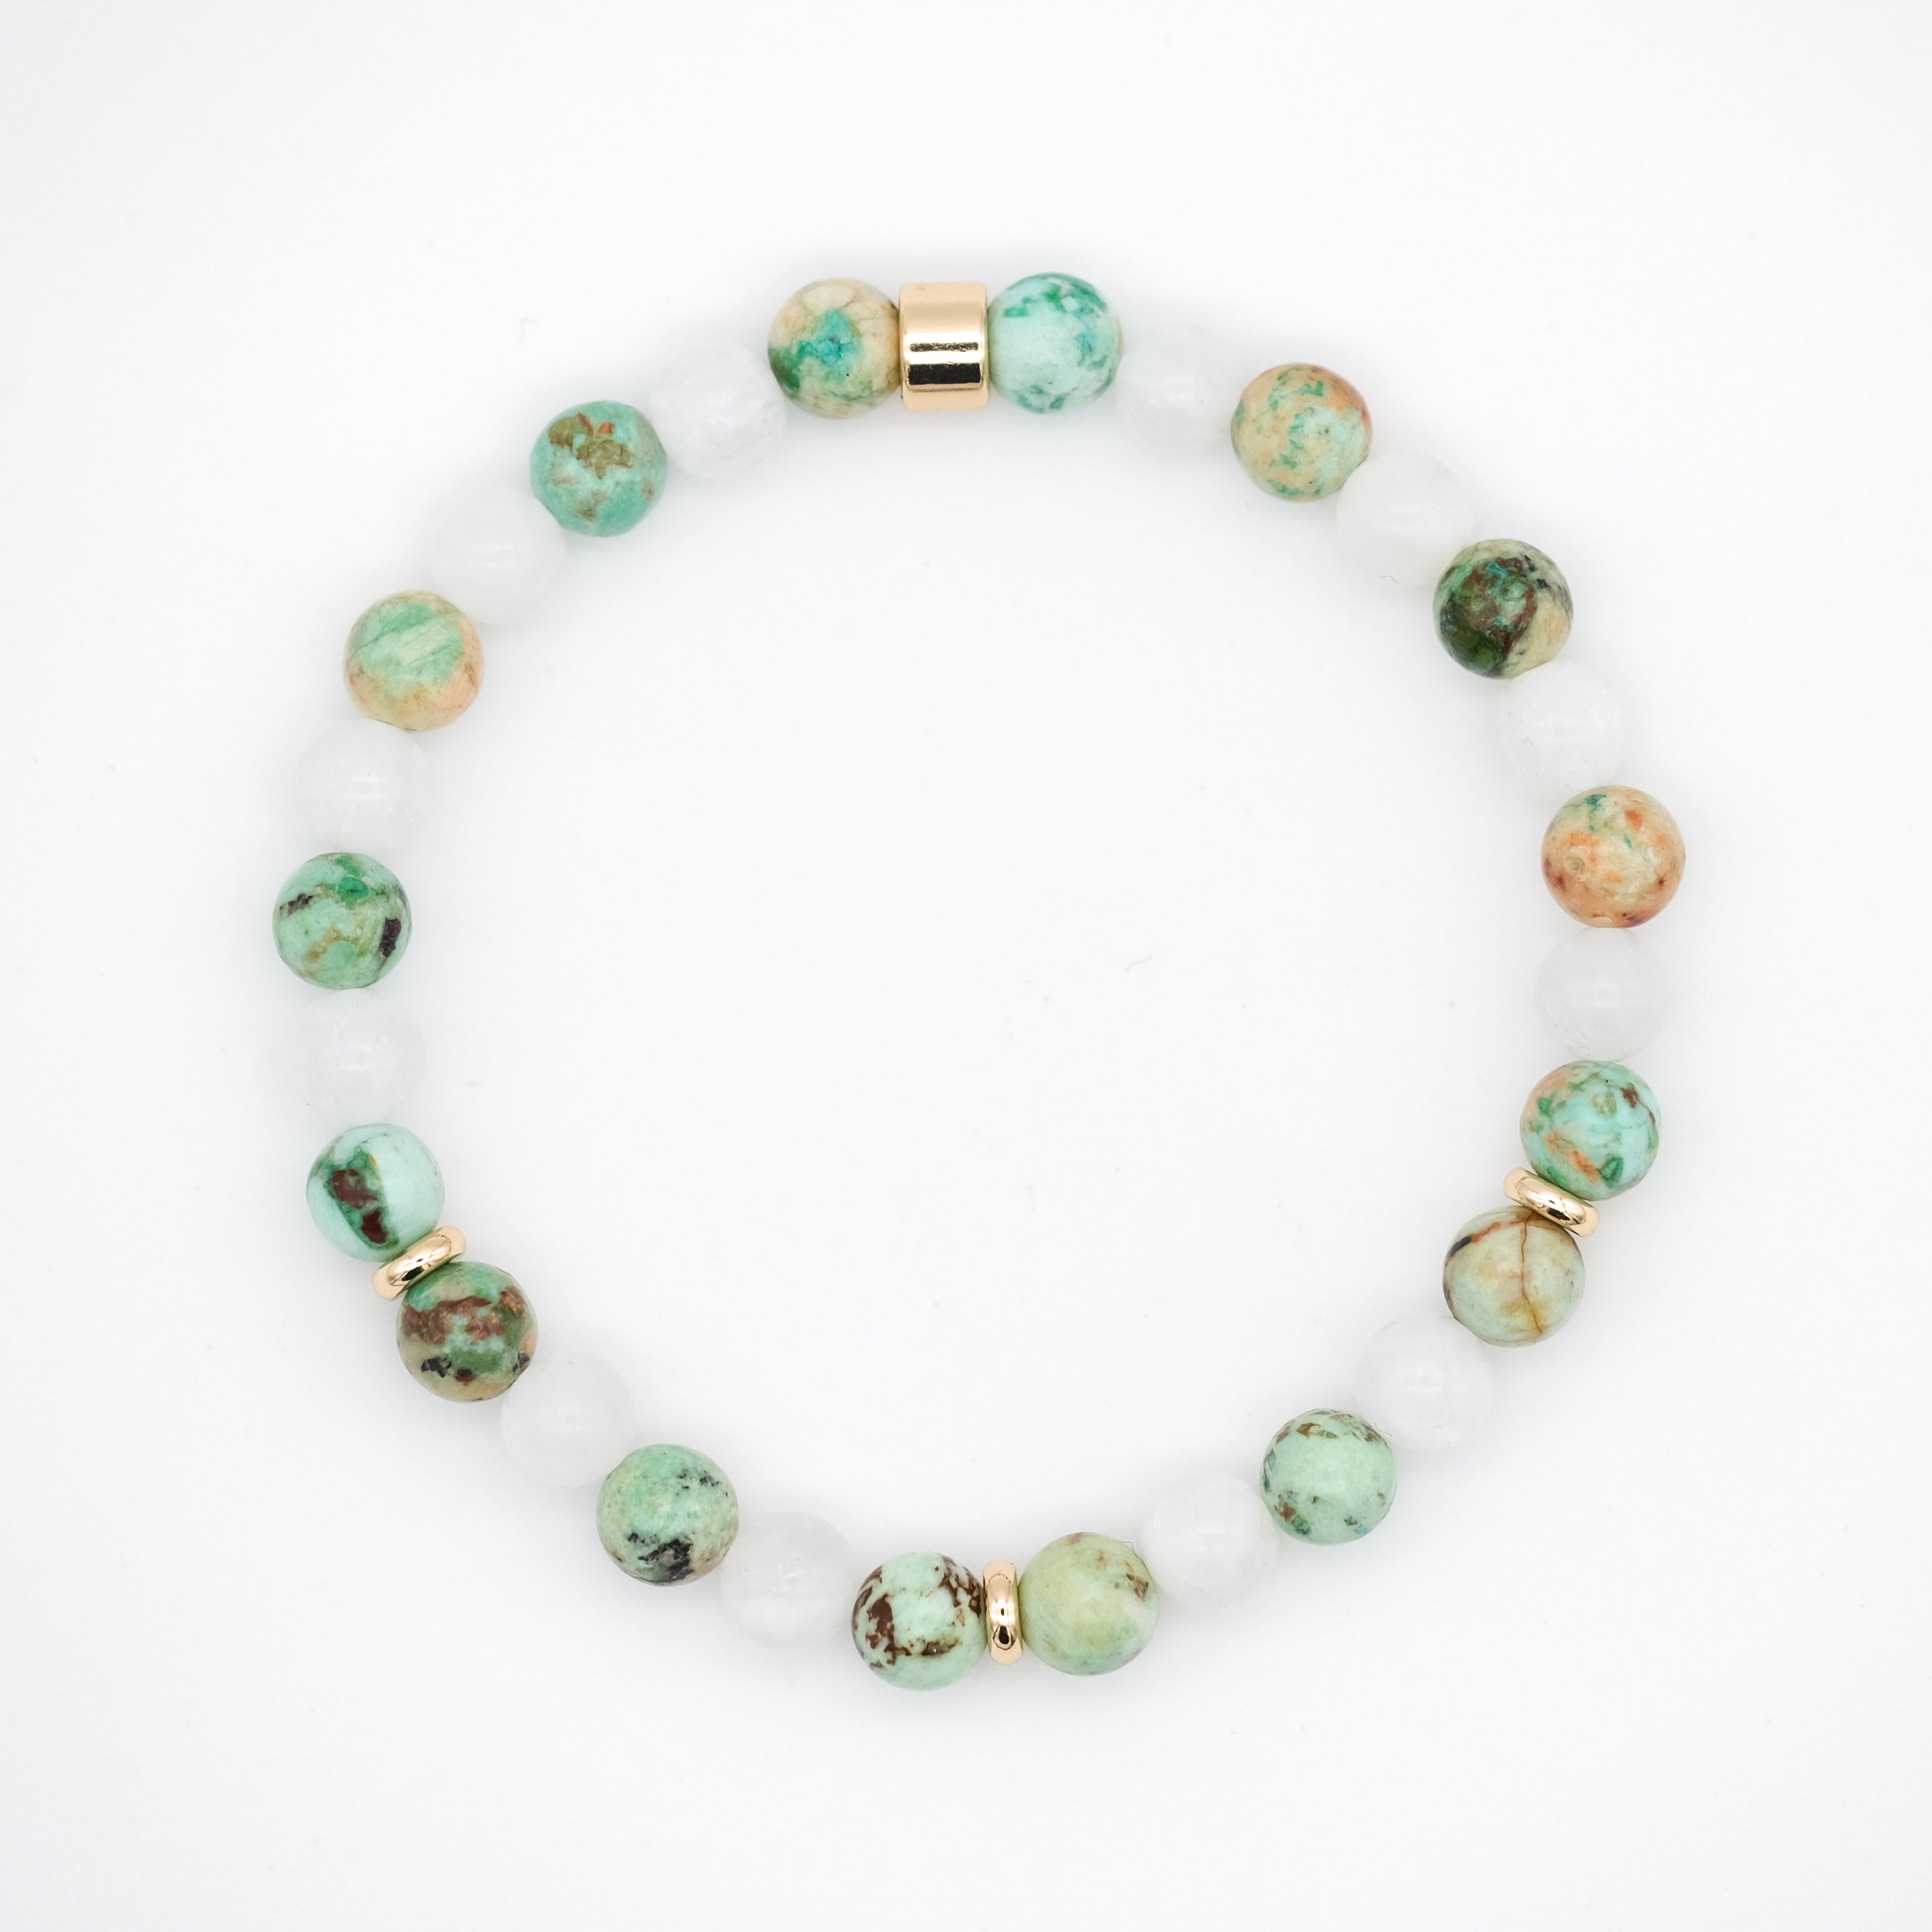 A moonstone and chrysocolla gemstone bracelet in 6mm beads with gold accessories from above